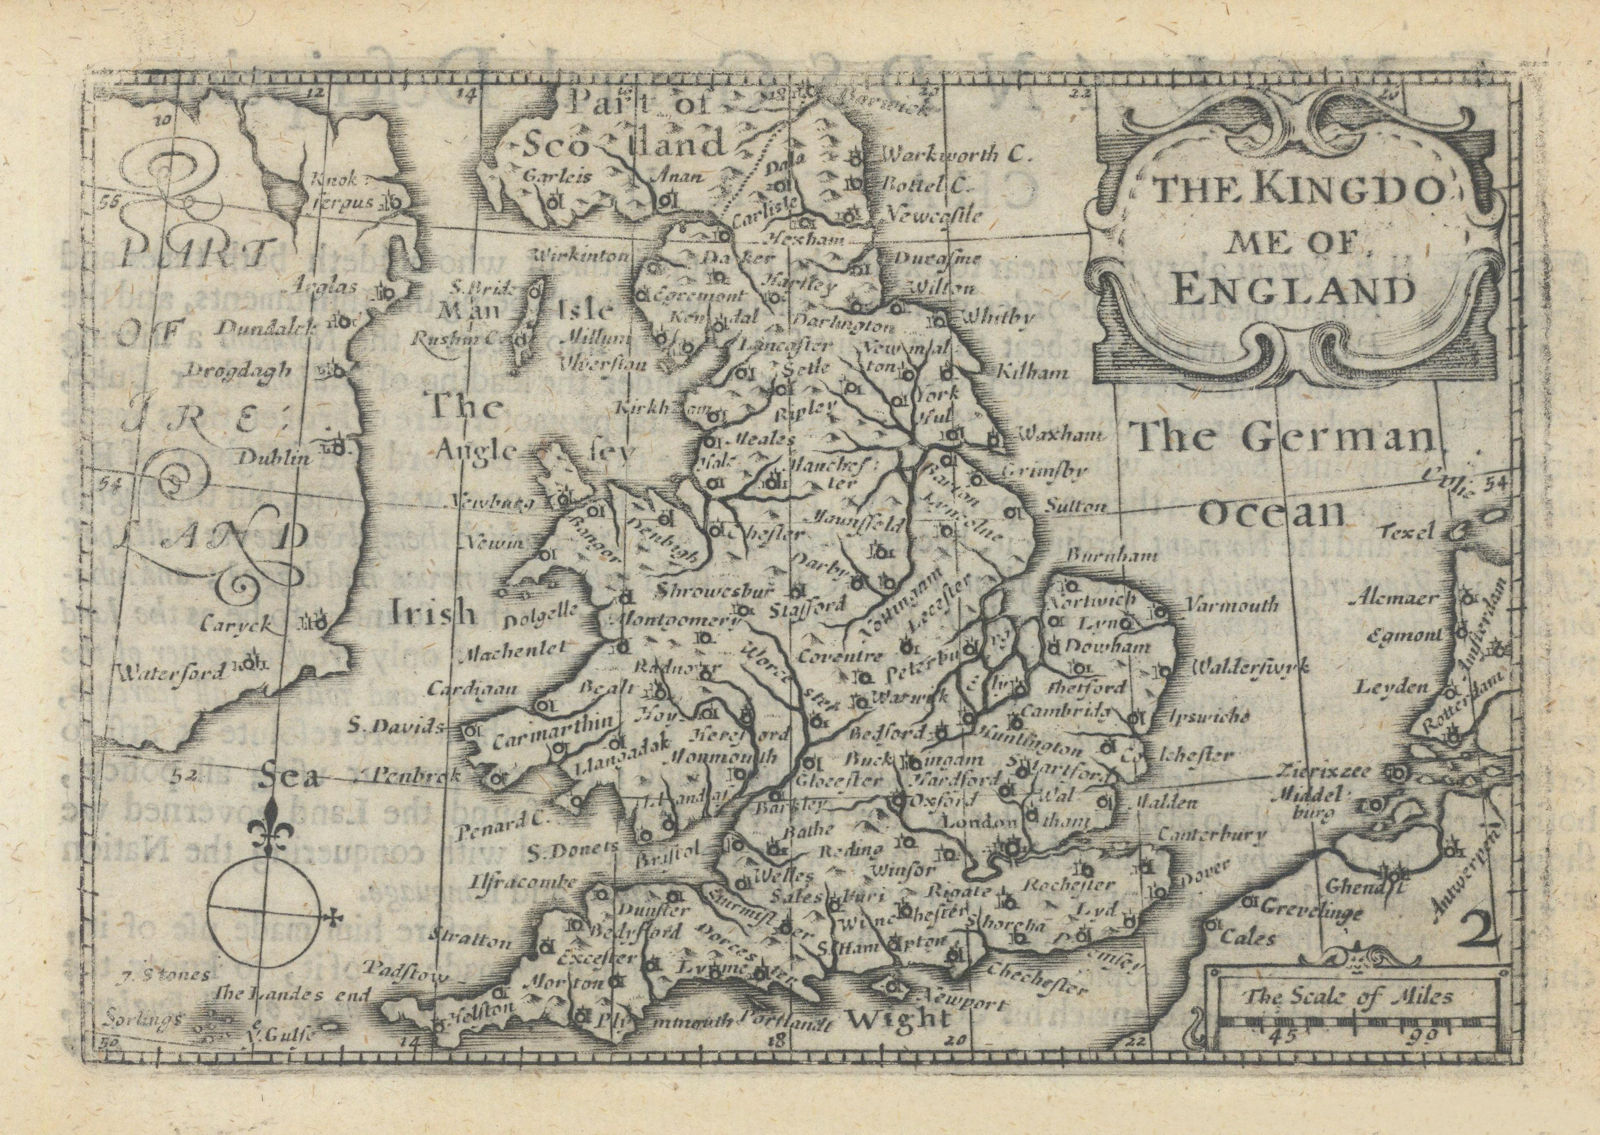 The Kingdome of England by van den Keere. "Speed miniature" 1627 old map